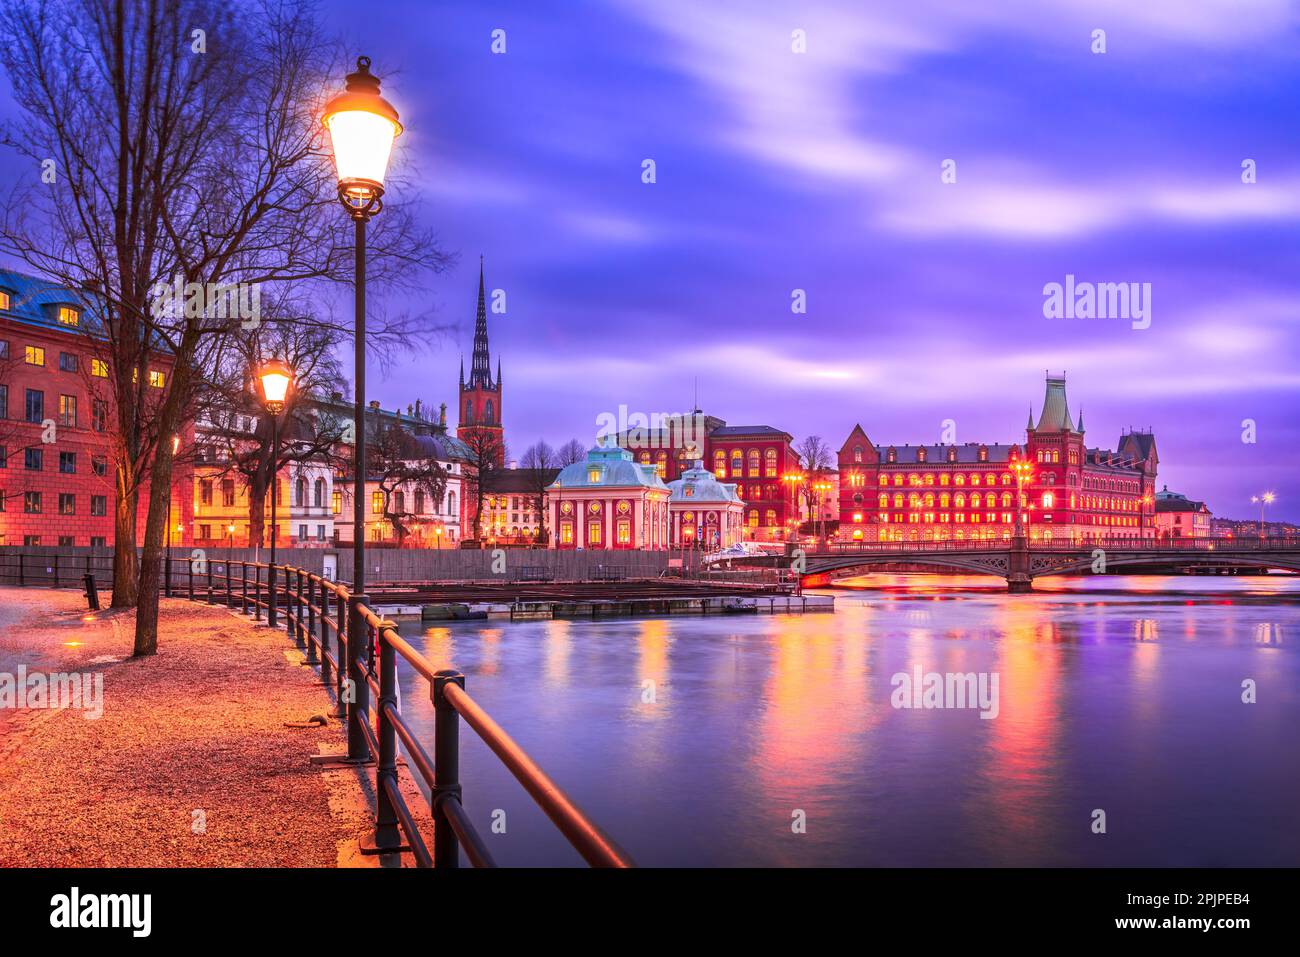 Stockholm, Sweden. Gamla Stan and Riddarholmen Islet,  shrouded in a cloudy twilight, scenic atmosphere for travelers. Stock Photo